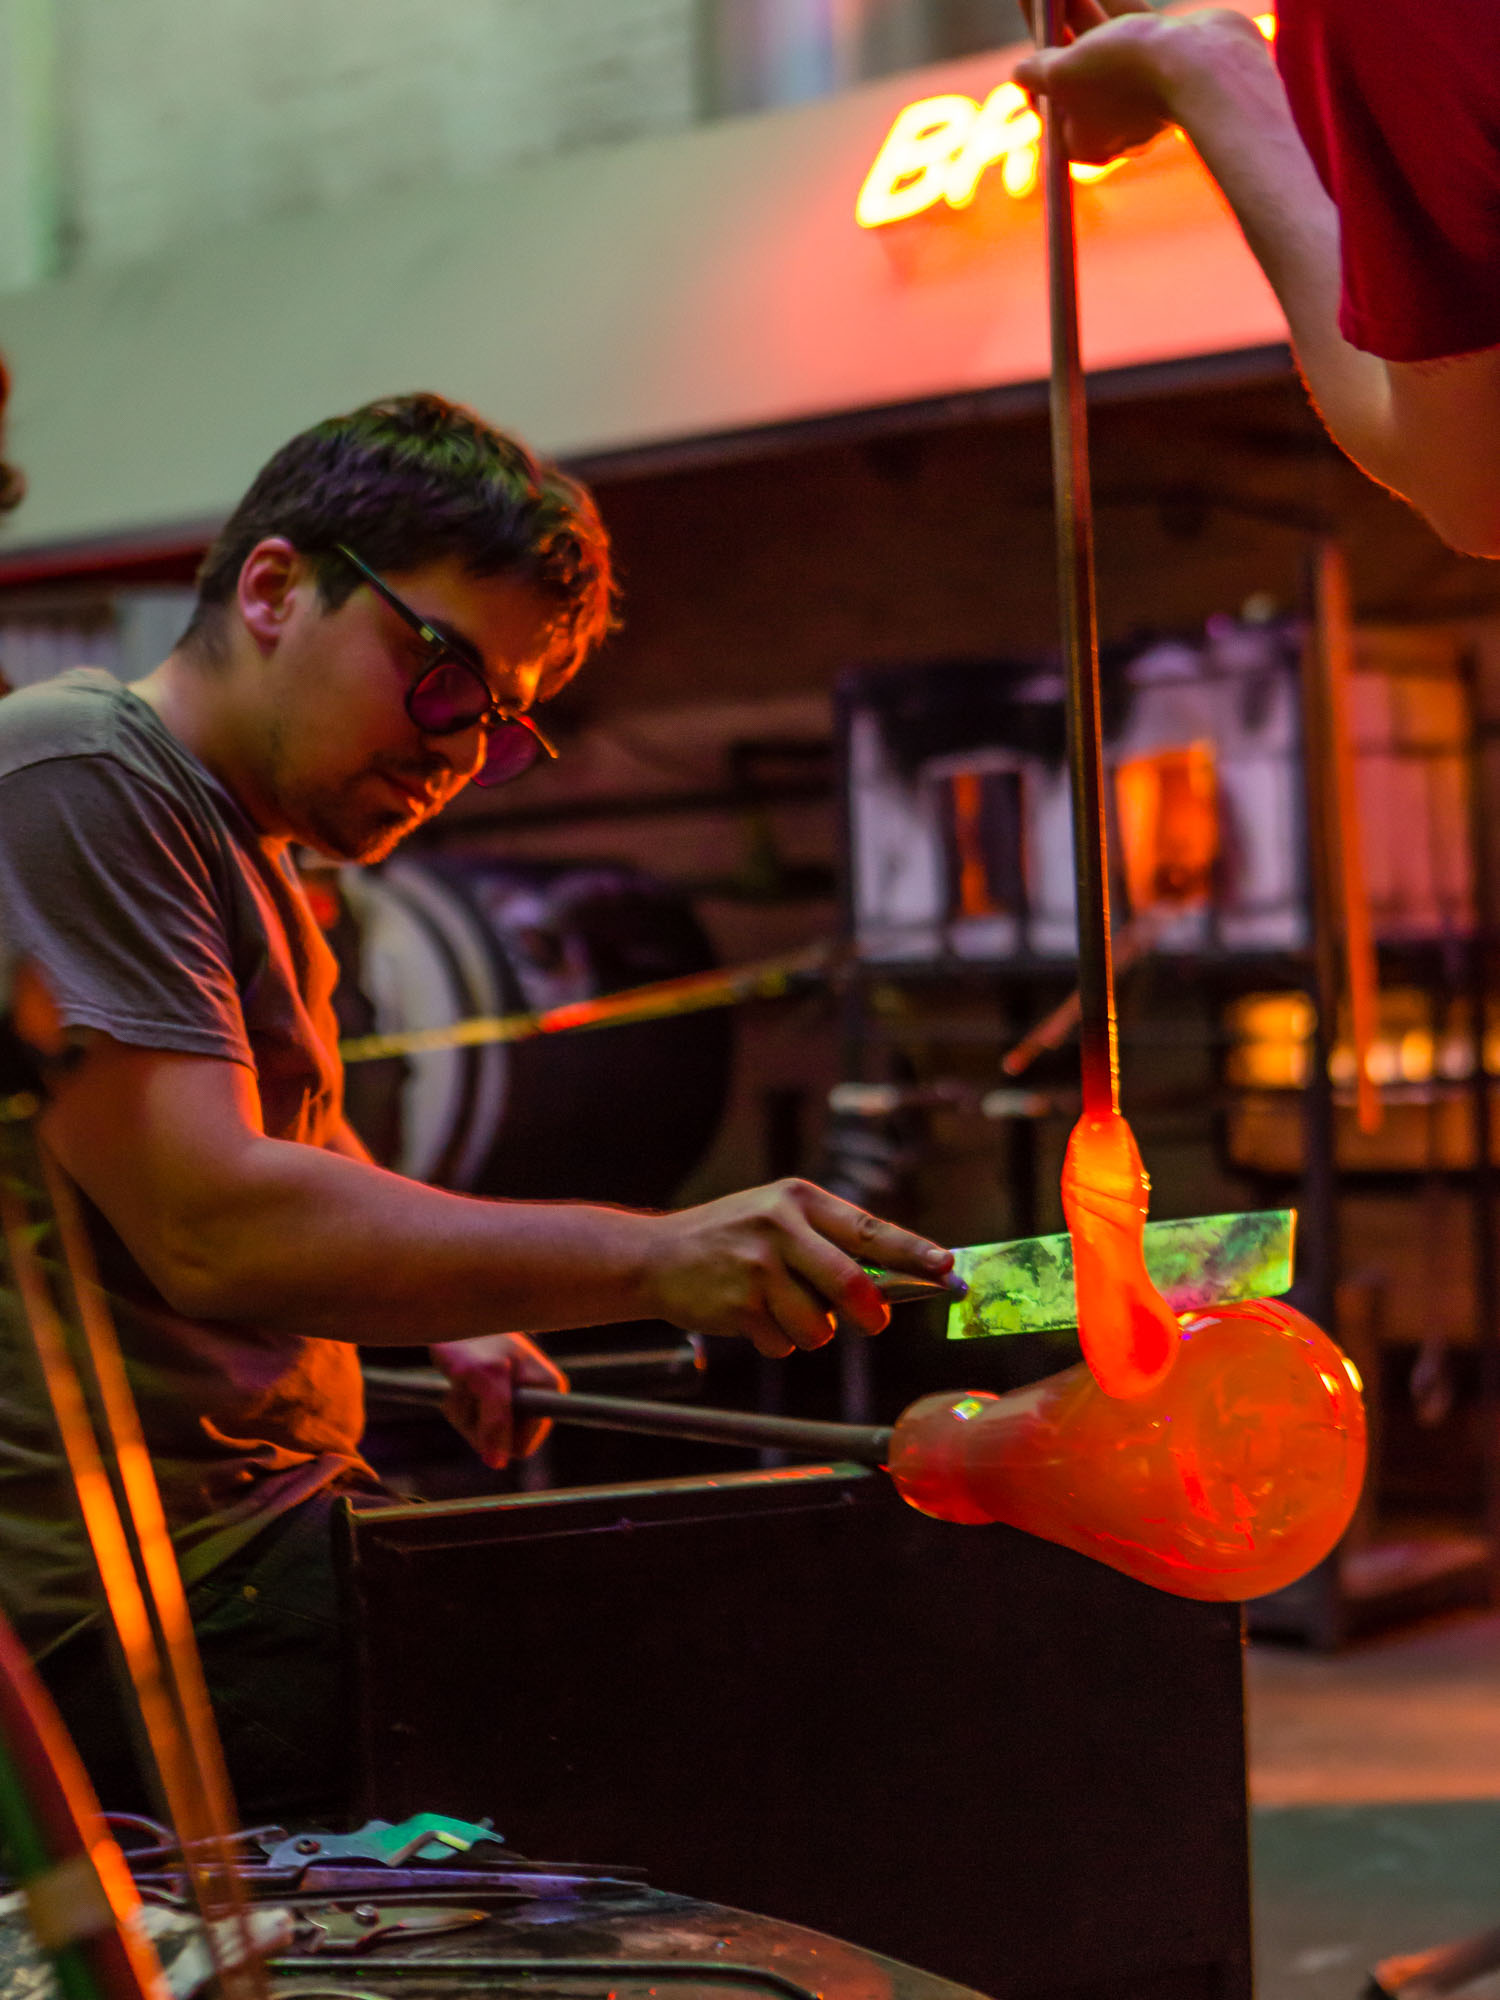 Glassmaking demonstration at Brooklyn Glass's "Hot Glass, Cold Beer" event.